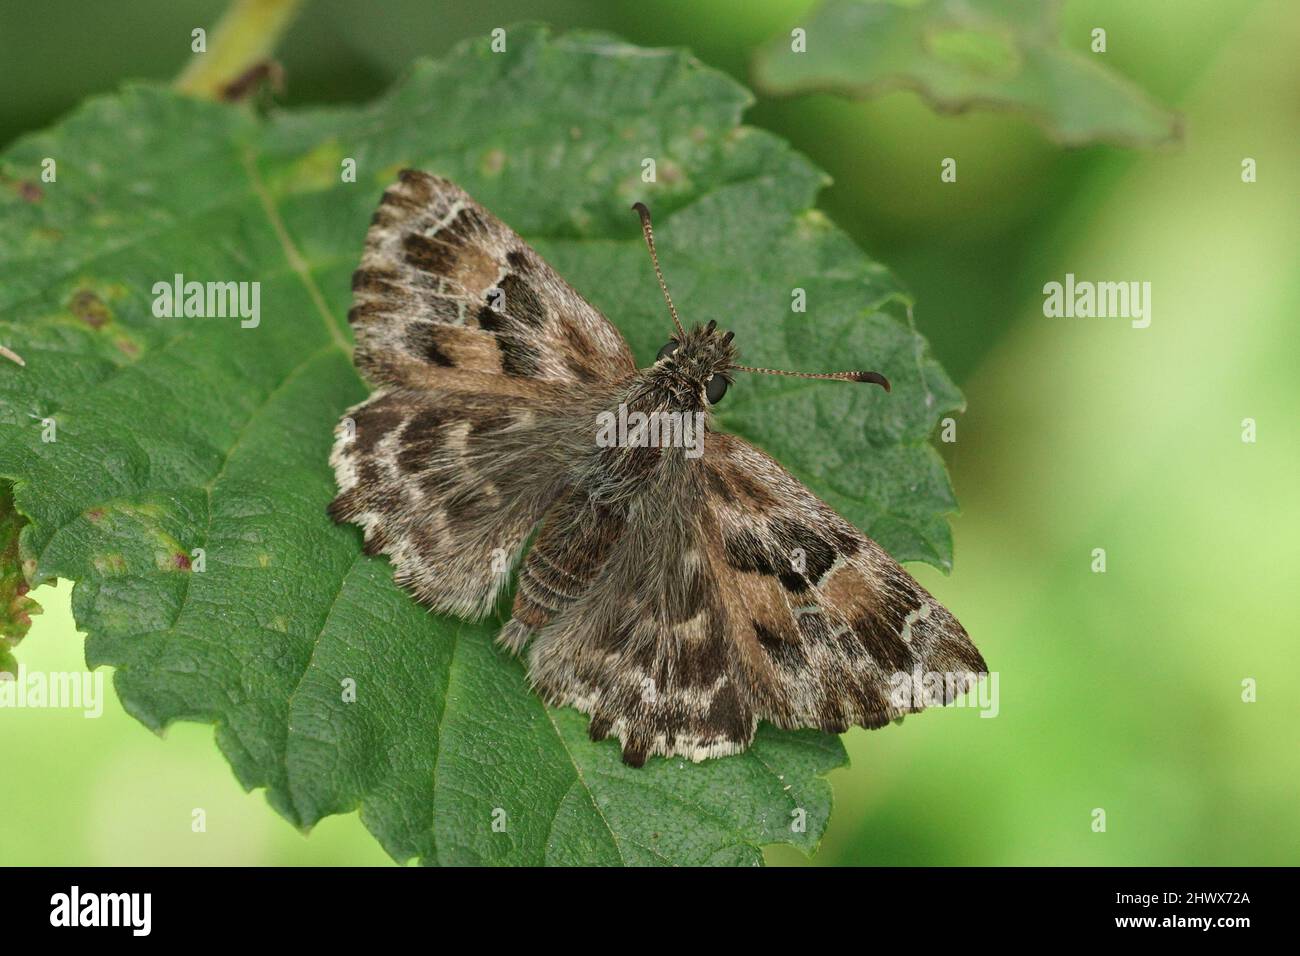 Closeup on a fresh emerged Mallowskipper, Carcharodus alceae sitting with open wings on a green leaf in the field Stock Photo